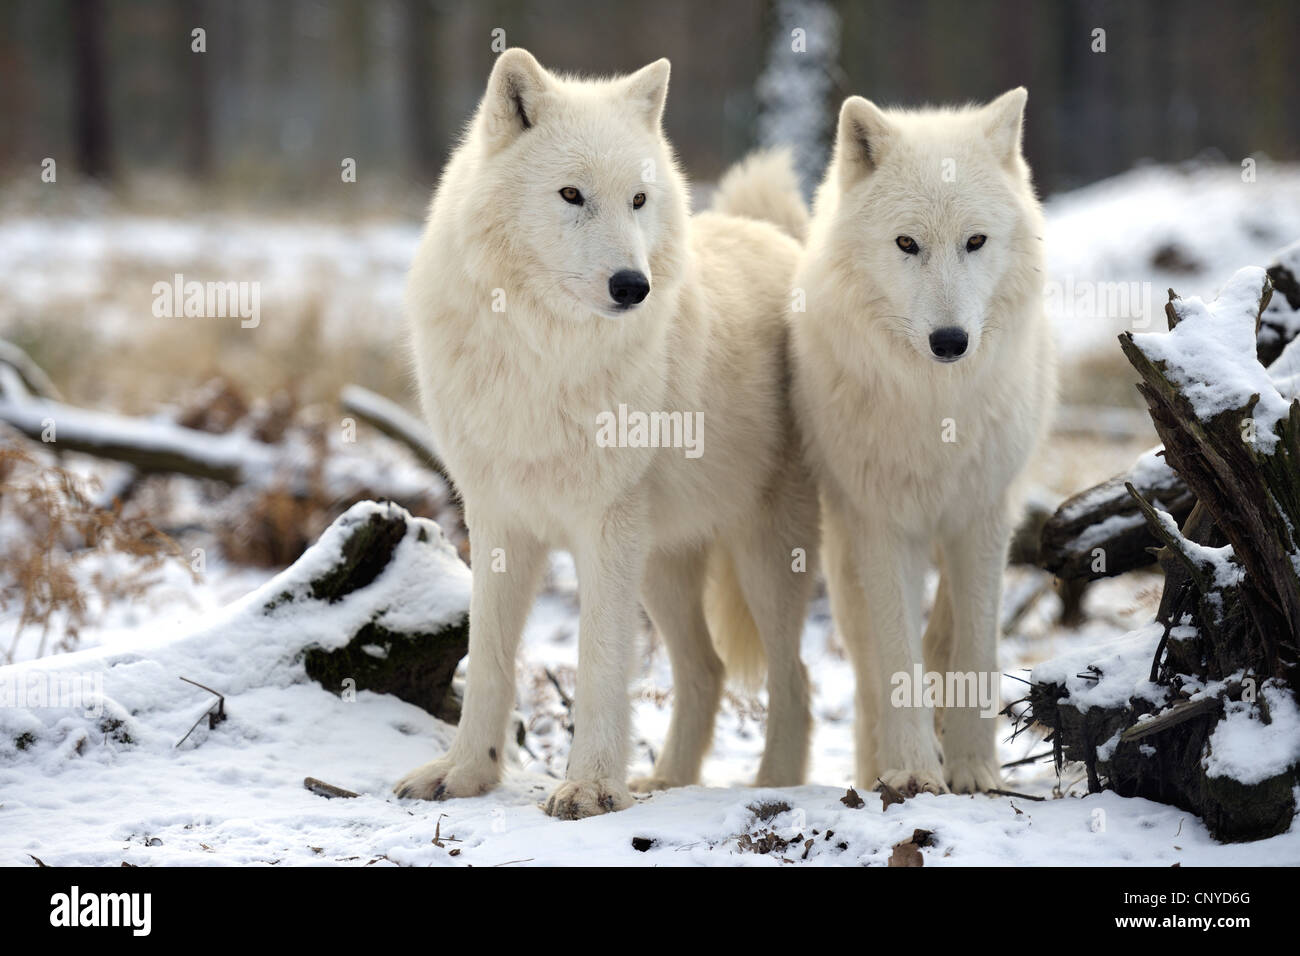 arctic wolf, tundra wolf (Canis lupus albus, Canis lupus arctos), two wolves standings side by side in snow Stock Photo